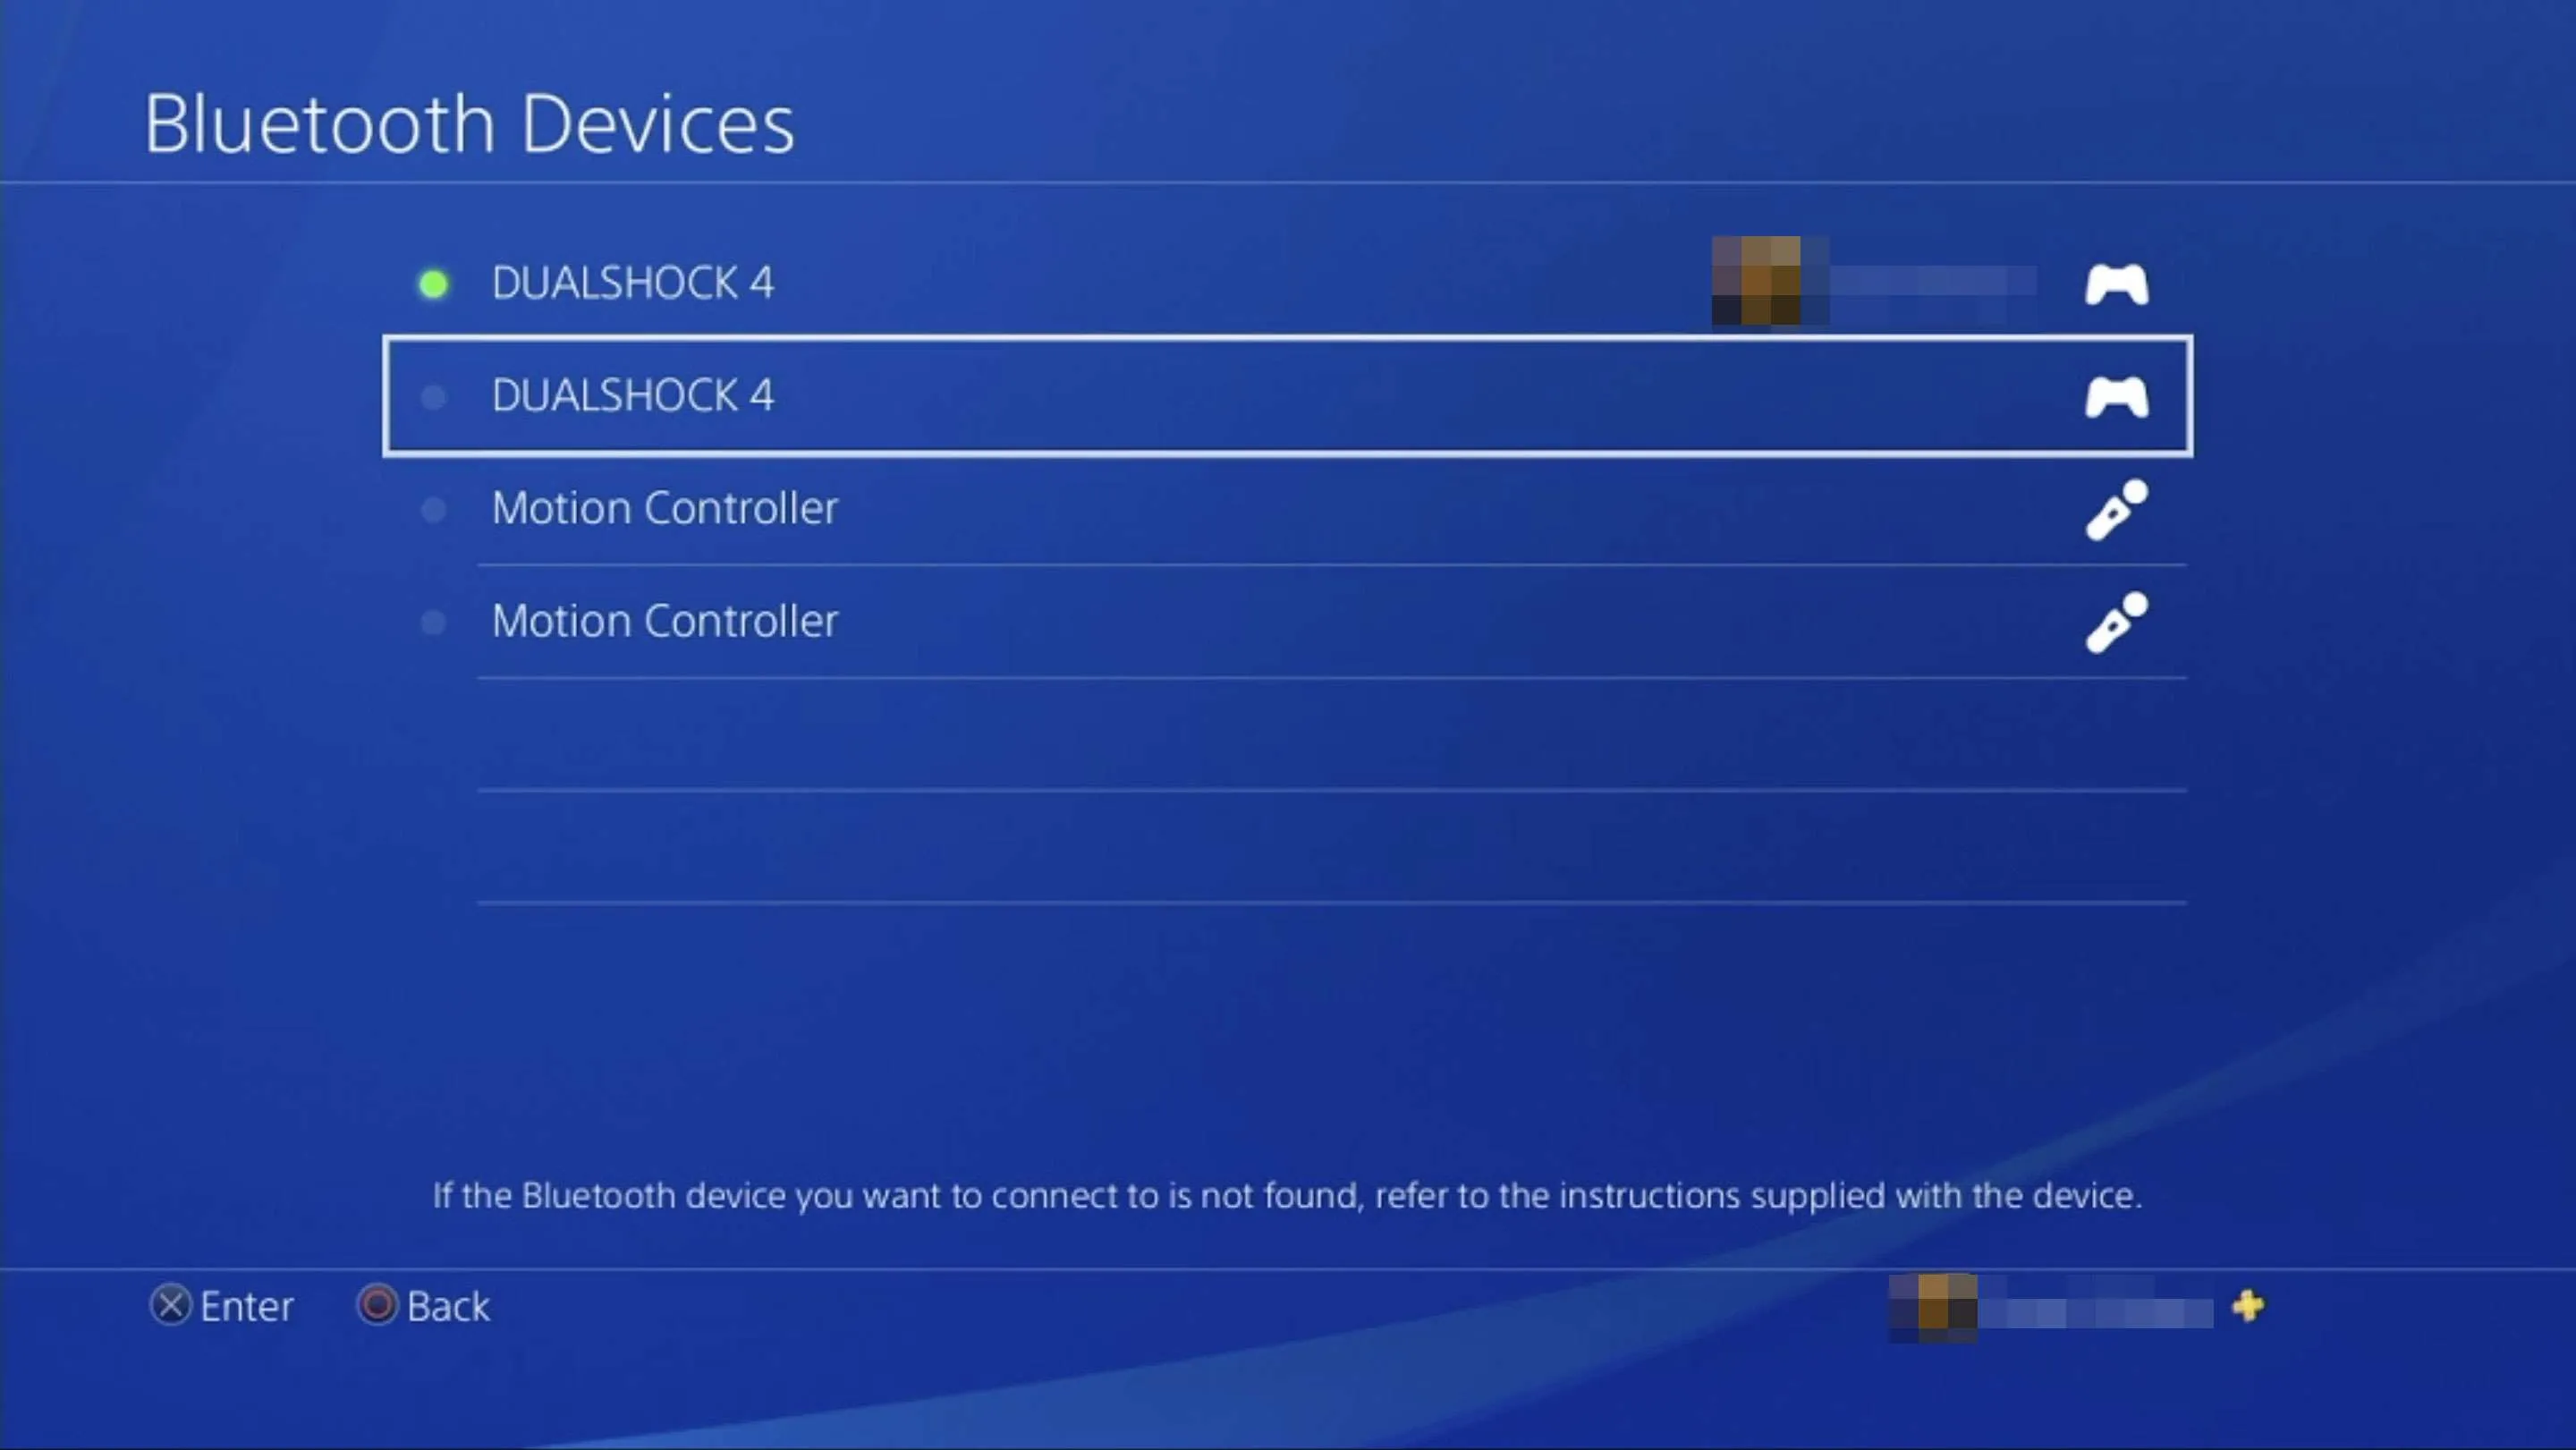 Reset PS4 Controller: Bluetooth Devices option in PS4 Settings